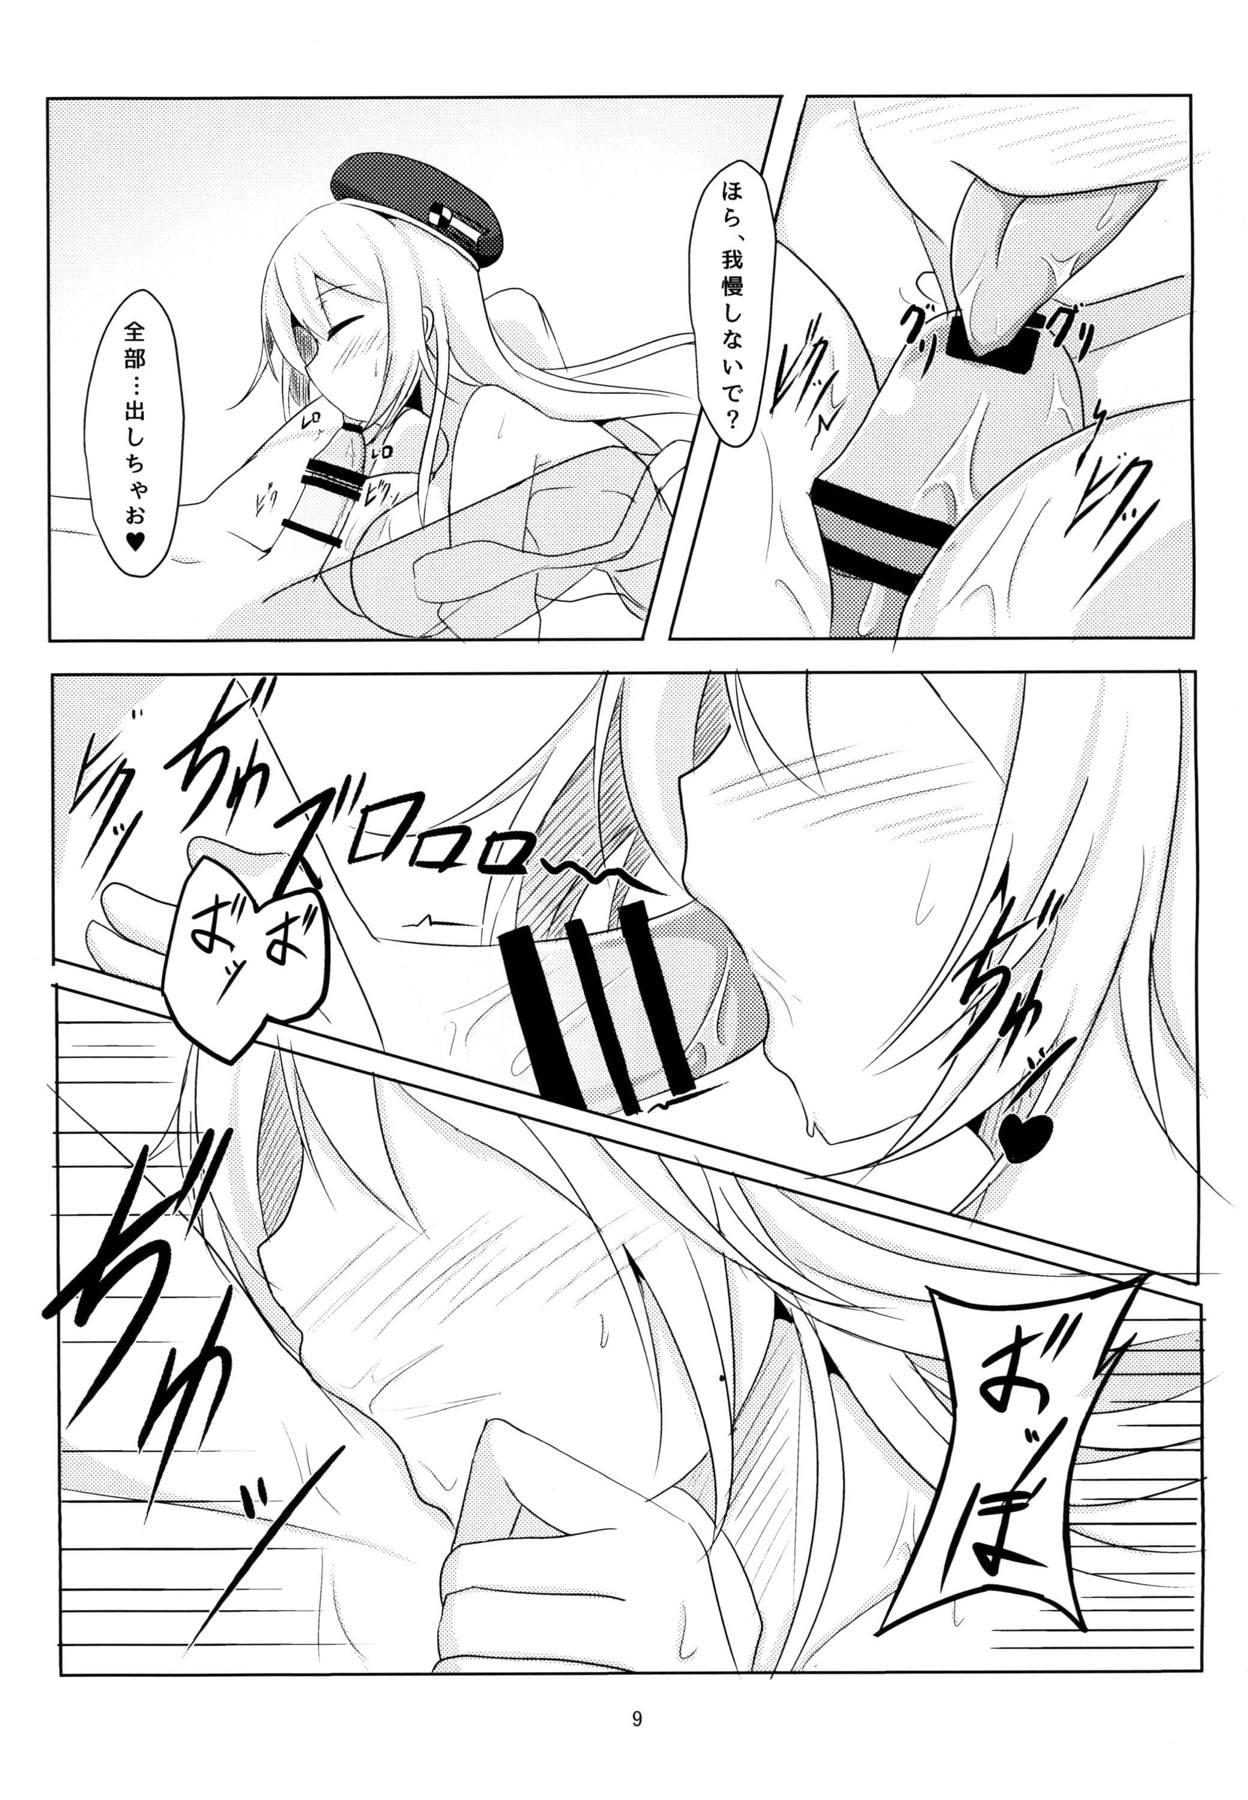 Uniform Rest 5 - Kantai collection Cuckolding - Page 8